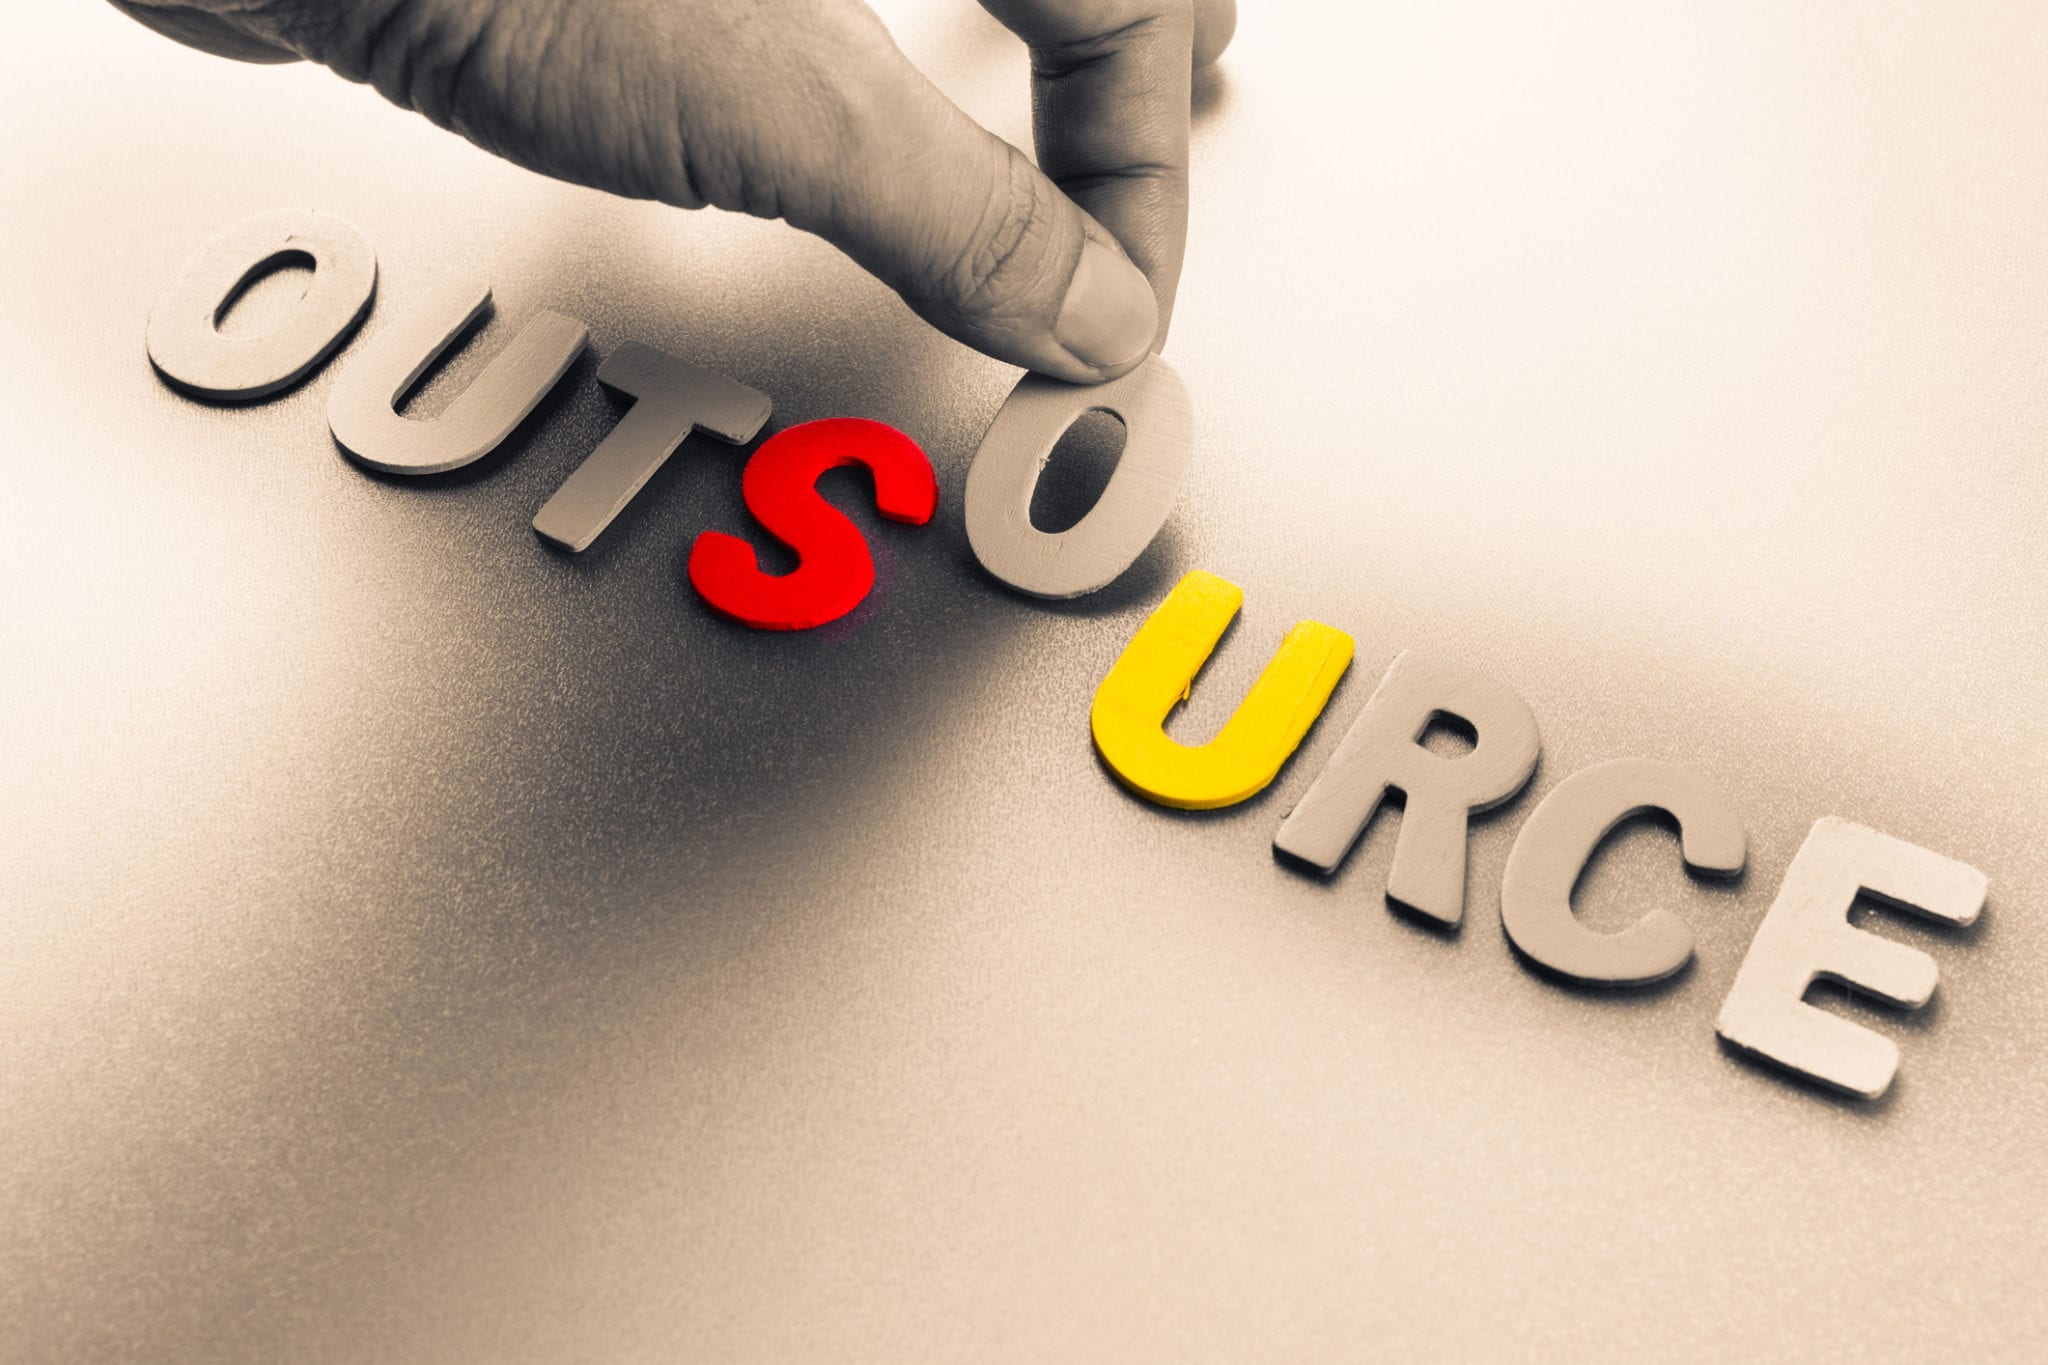 5 Things You Can Outsource to Make Your Business More Efficient